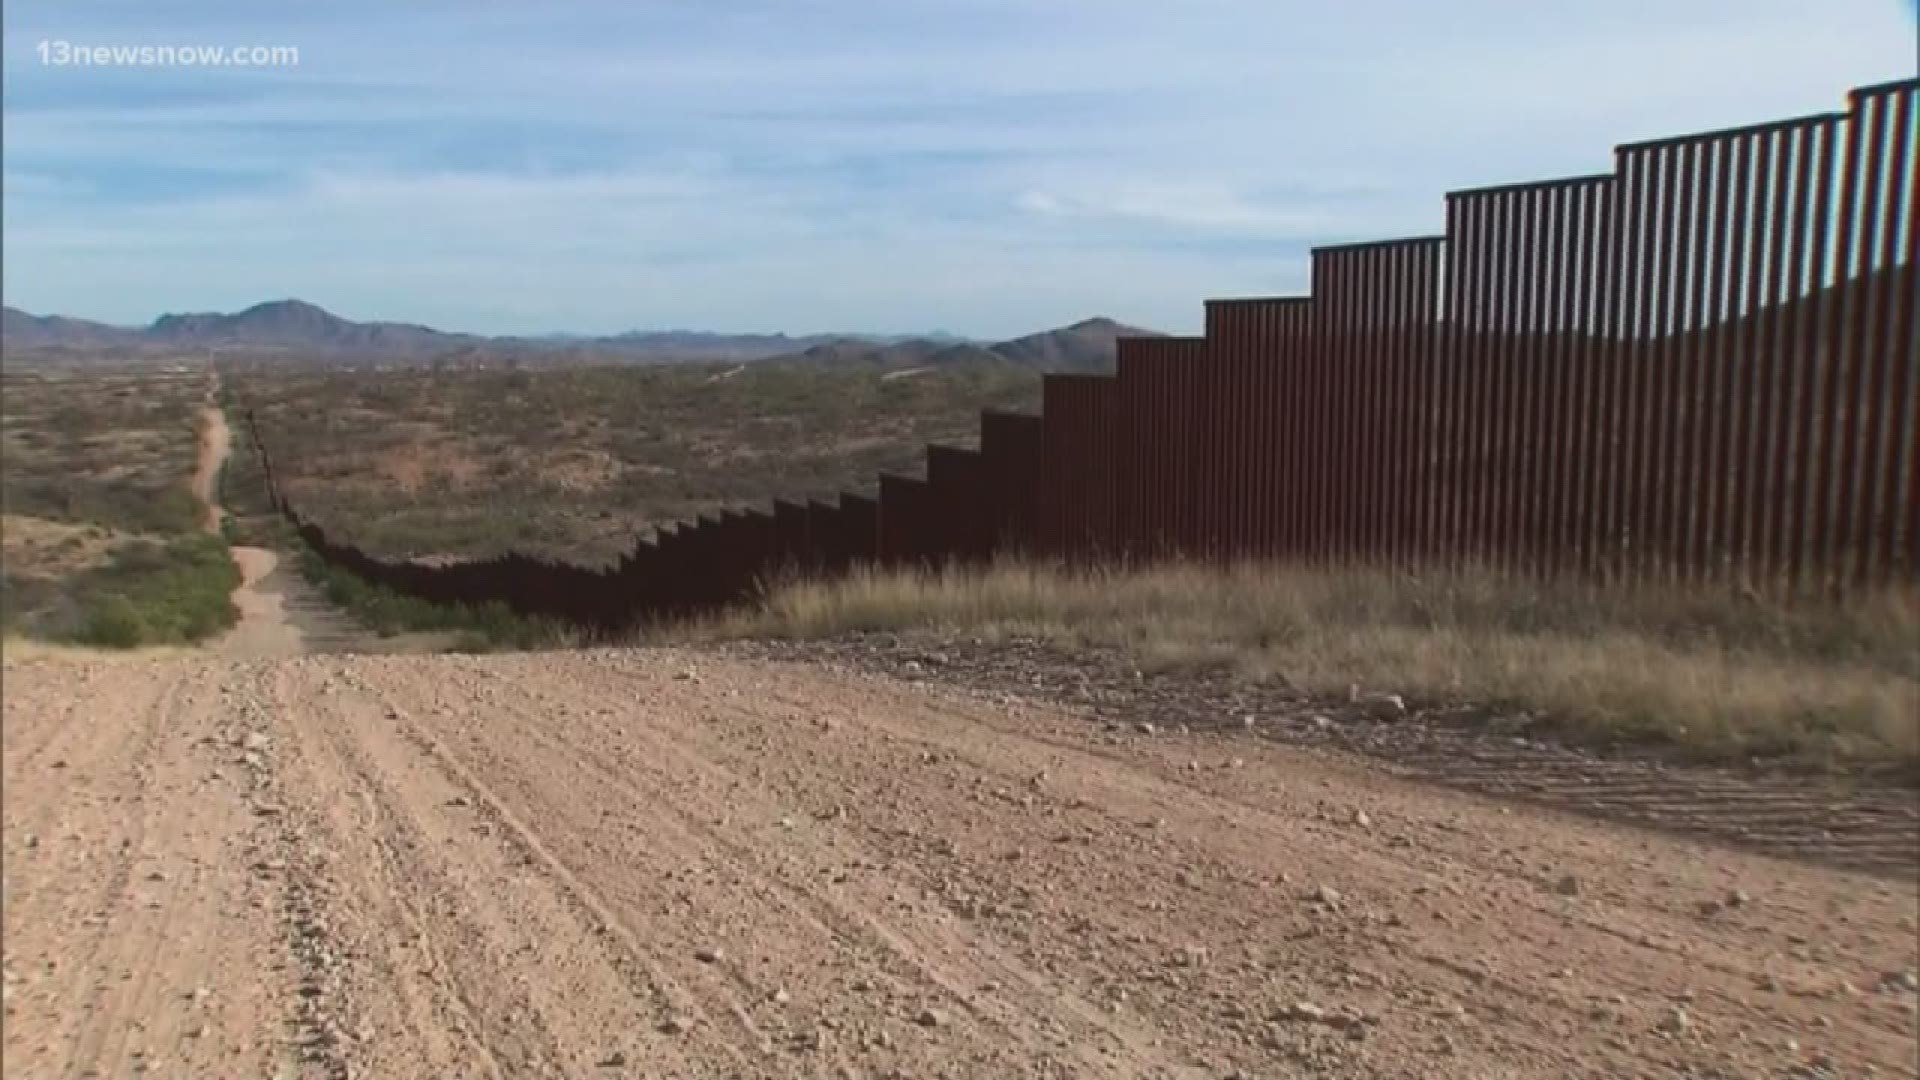 Virginia Senator Tim Kaine is still against President Trump's border wall funding, but doesn't think there will be a government shutdown when the budget expires.